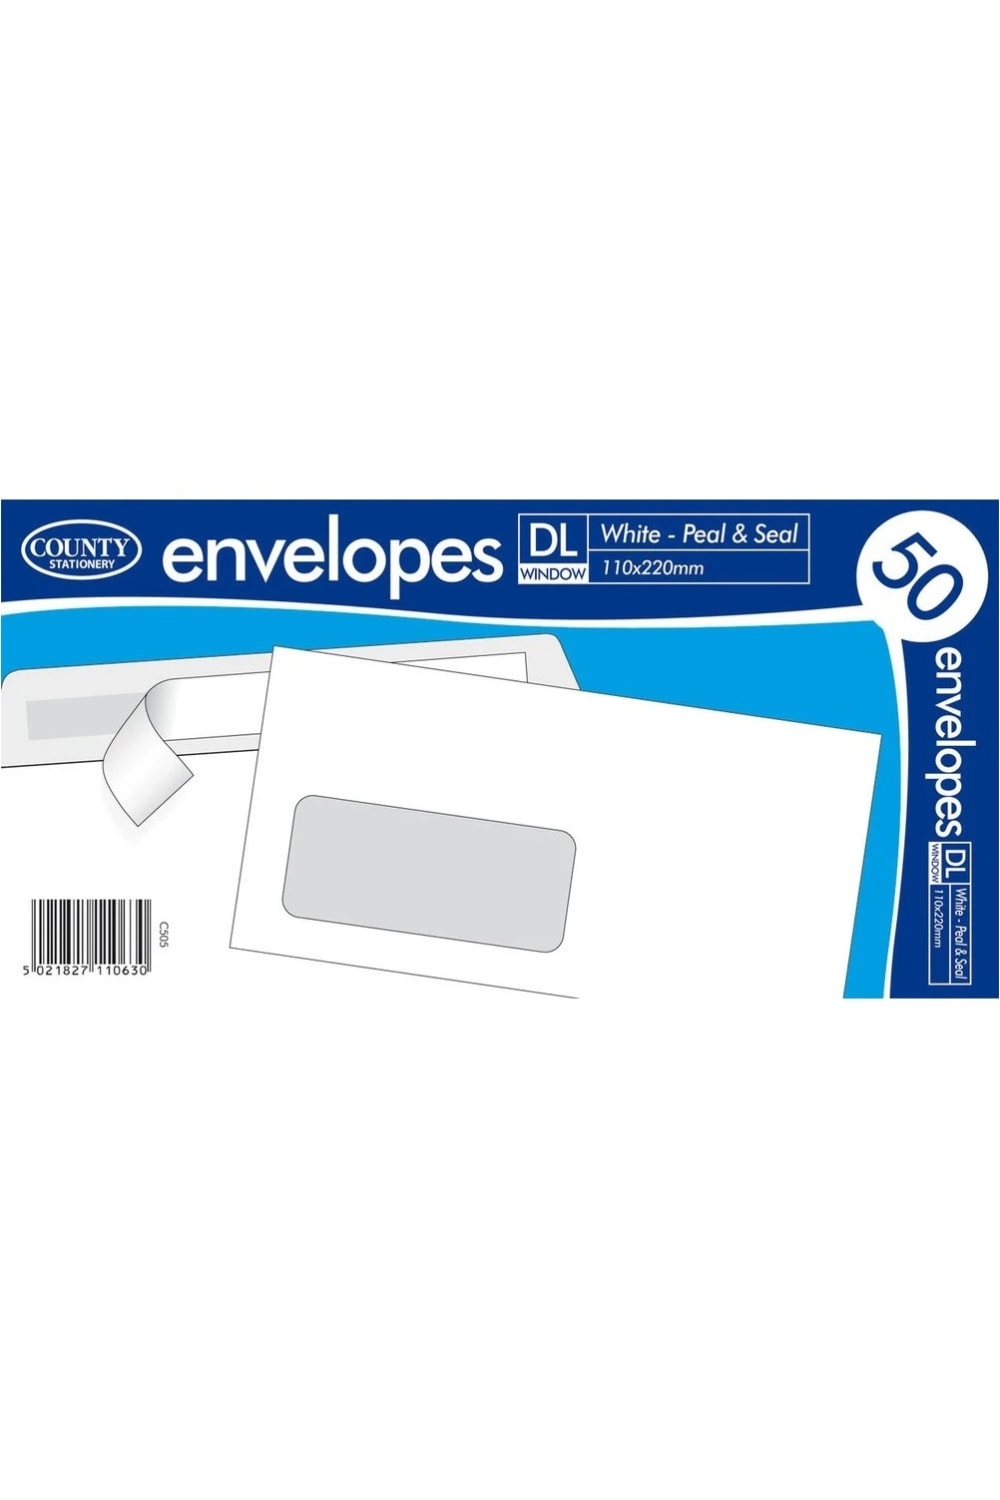 County Stationery Windowed Self Seal Envelope (Pack of 50) (White) (DL)